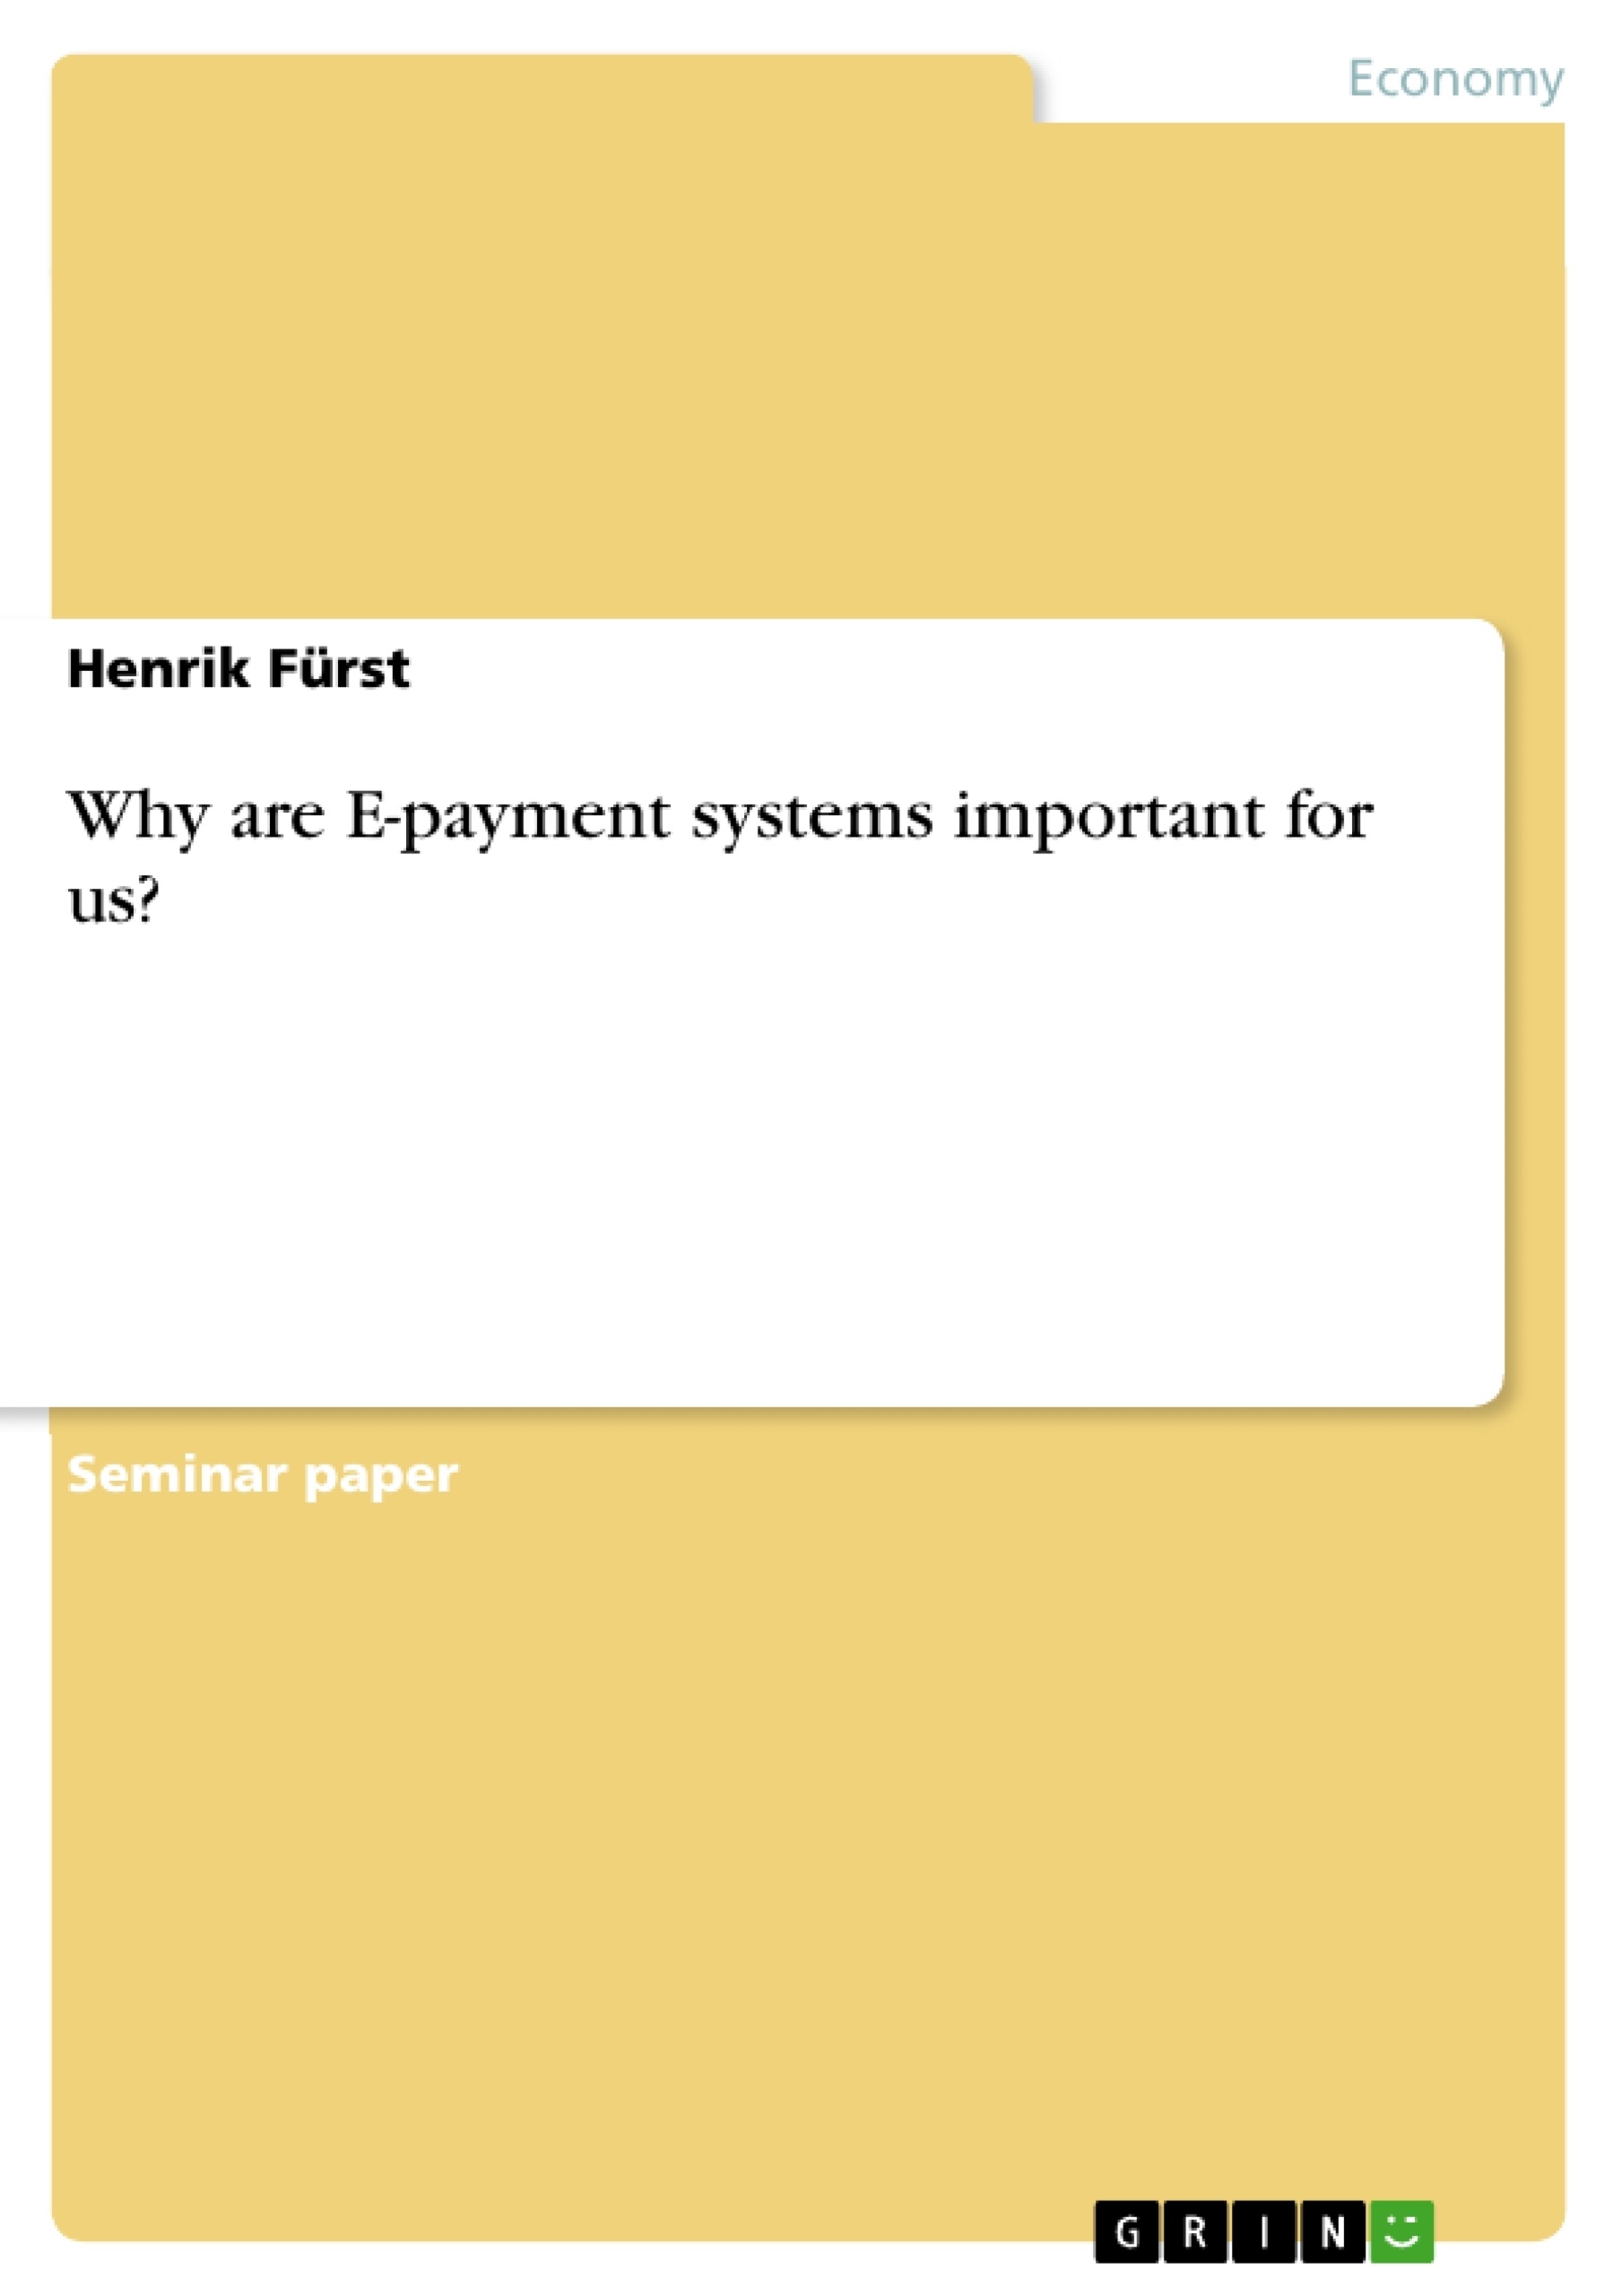 Title: Why are E-payment systems important for us?